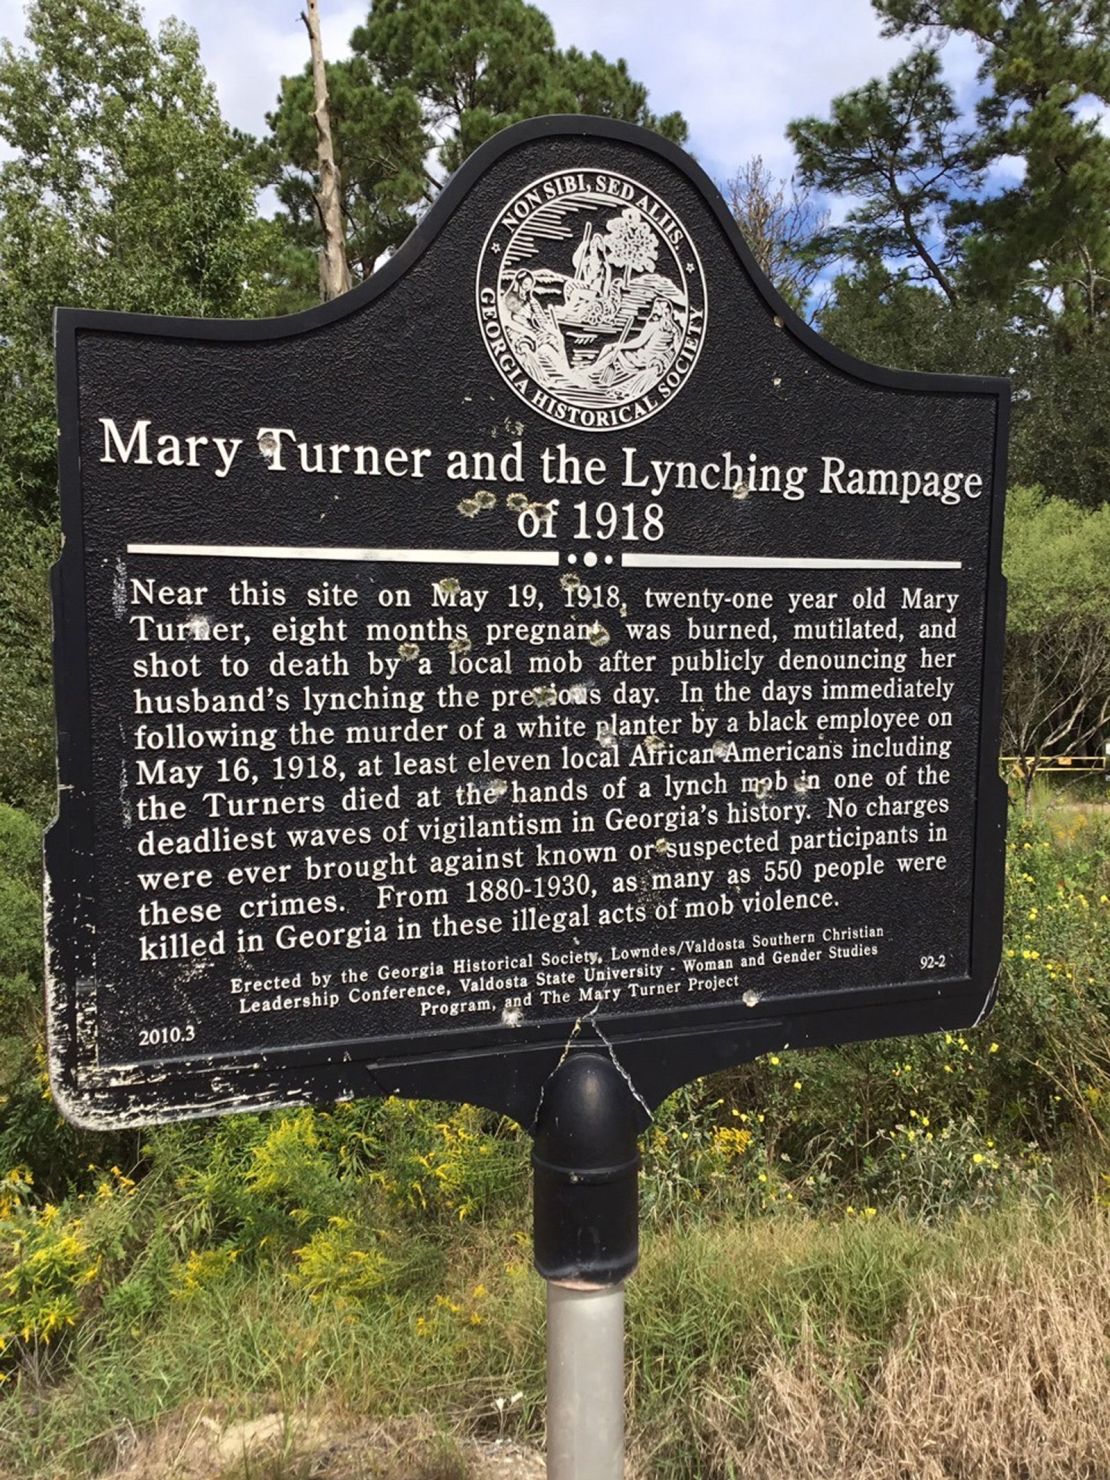 The marker that memorialized Mary Turner, a pregnant Black woman who was lynched along with 10 other Black residents of their Georgia town, was shot so many times it had to be replaced. 